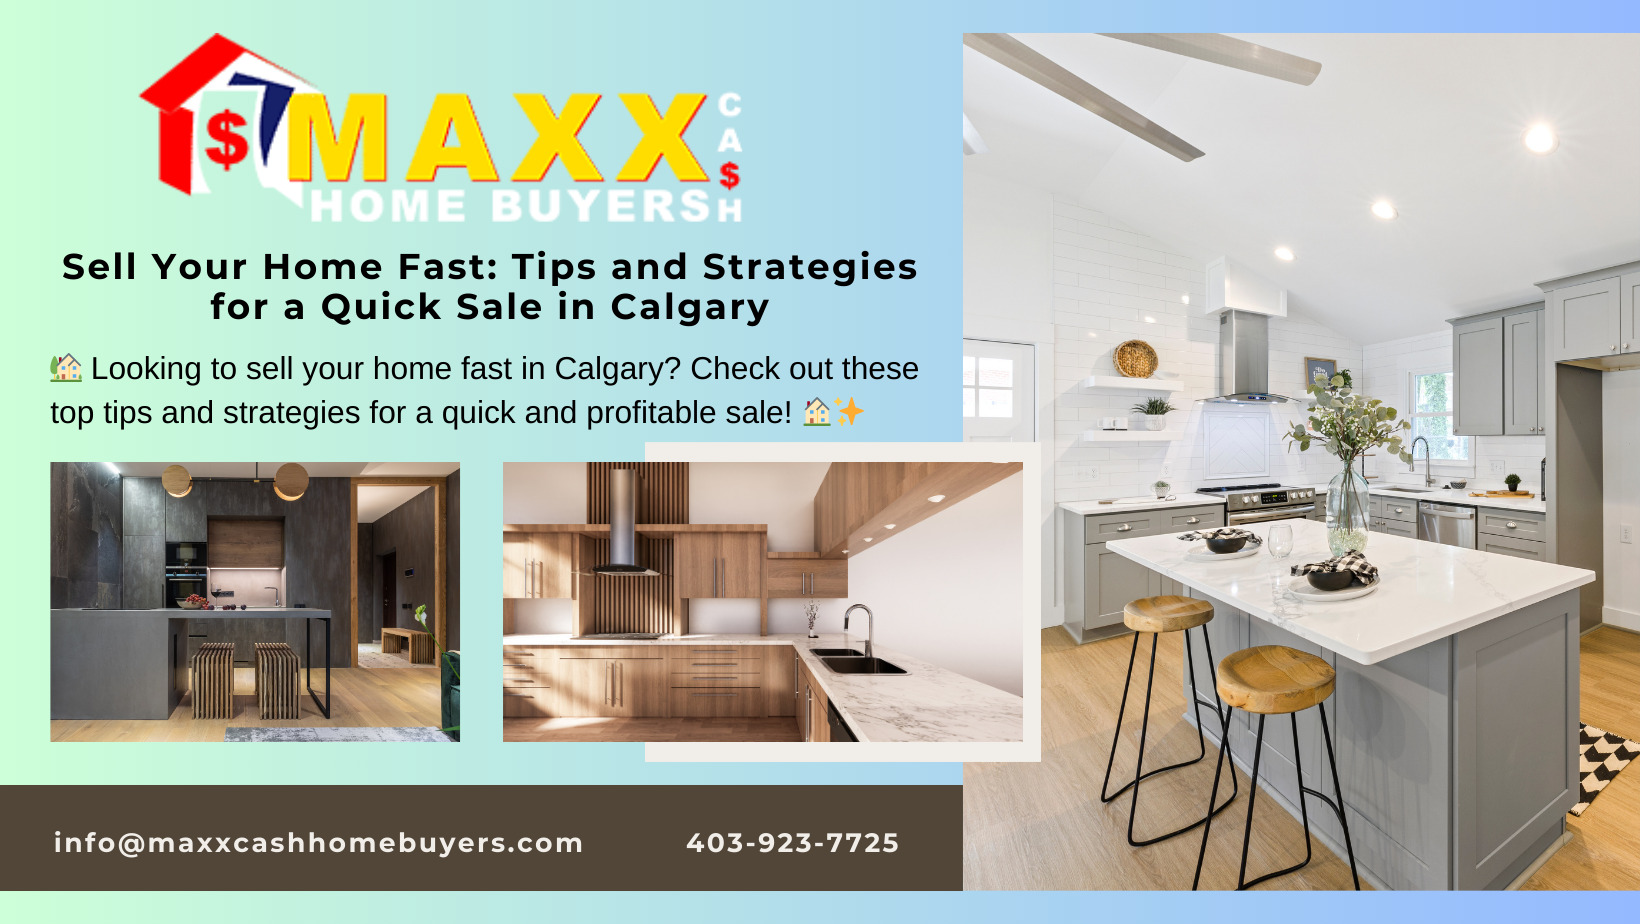 Sell Your Home Fast Tips and Strategies for a Quick Sale in Calgary